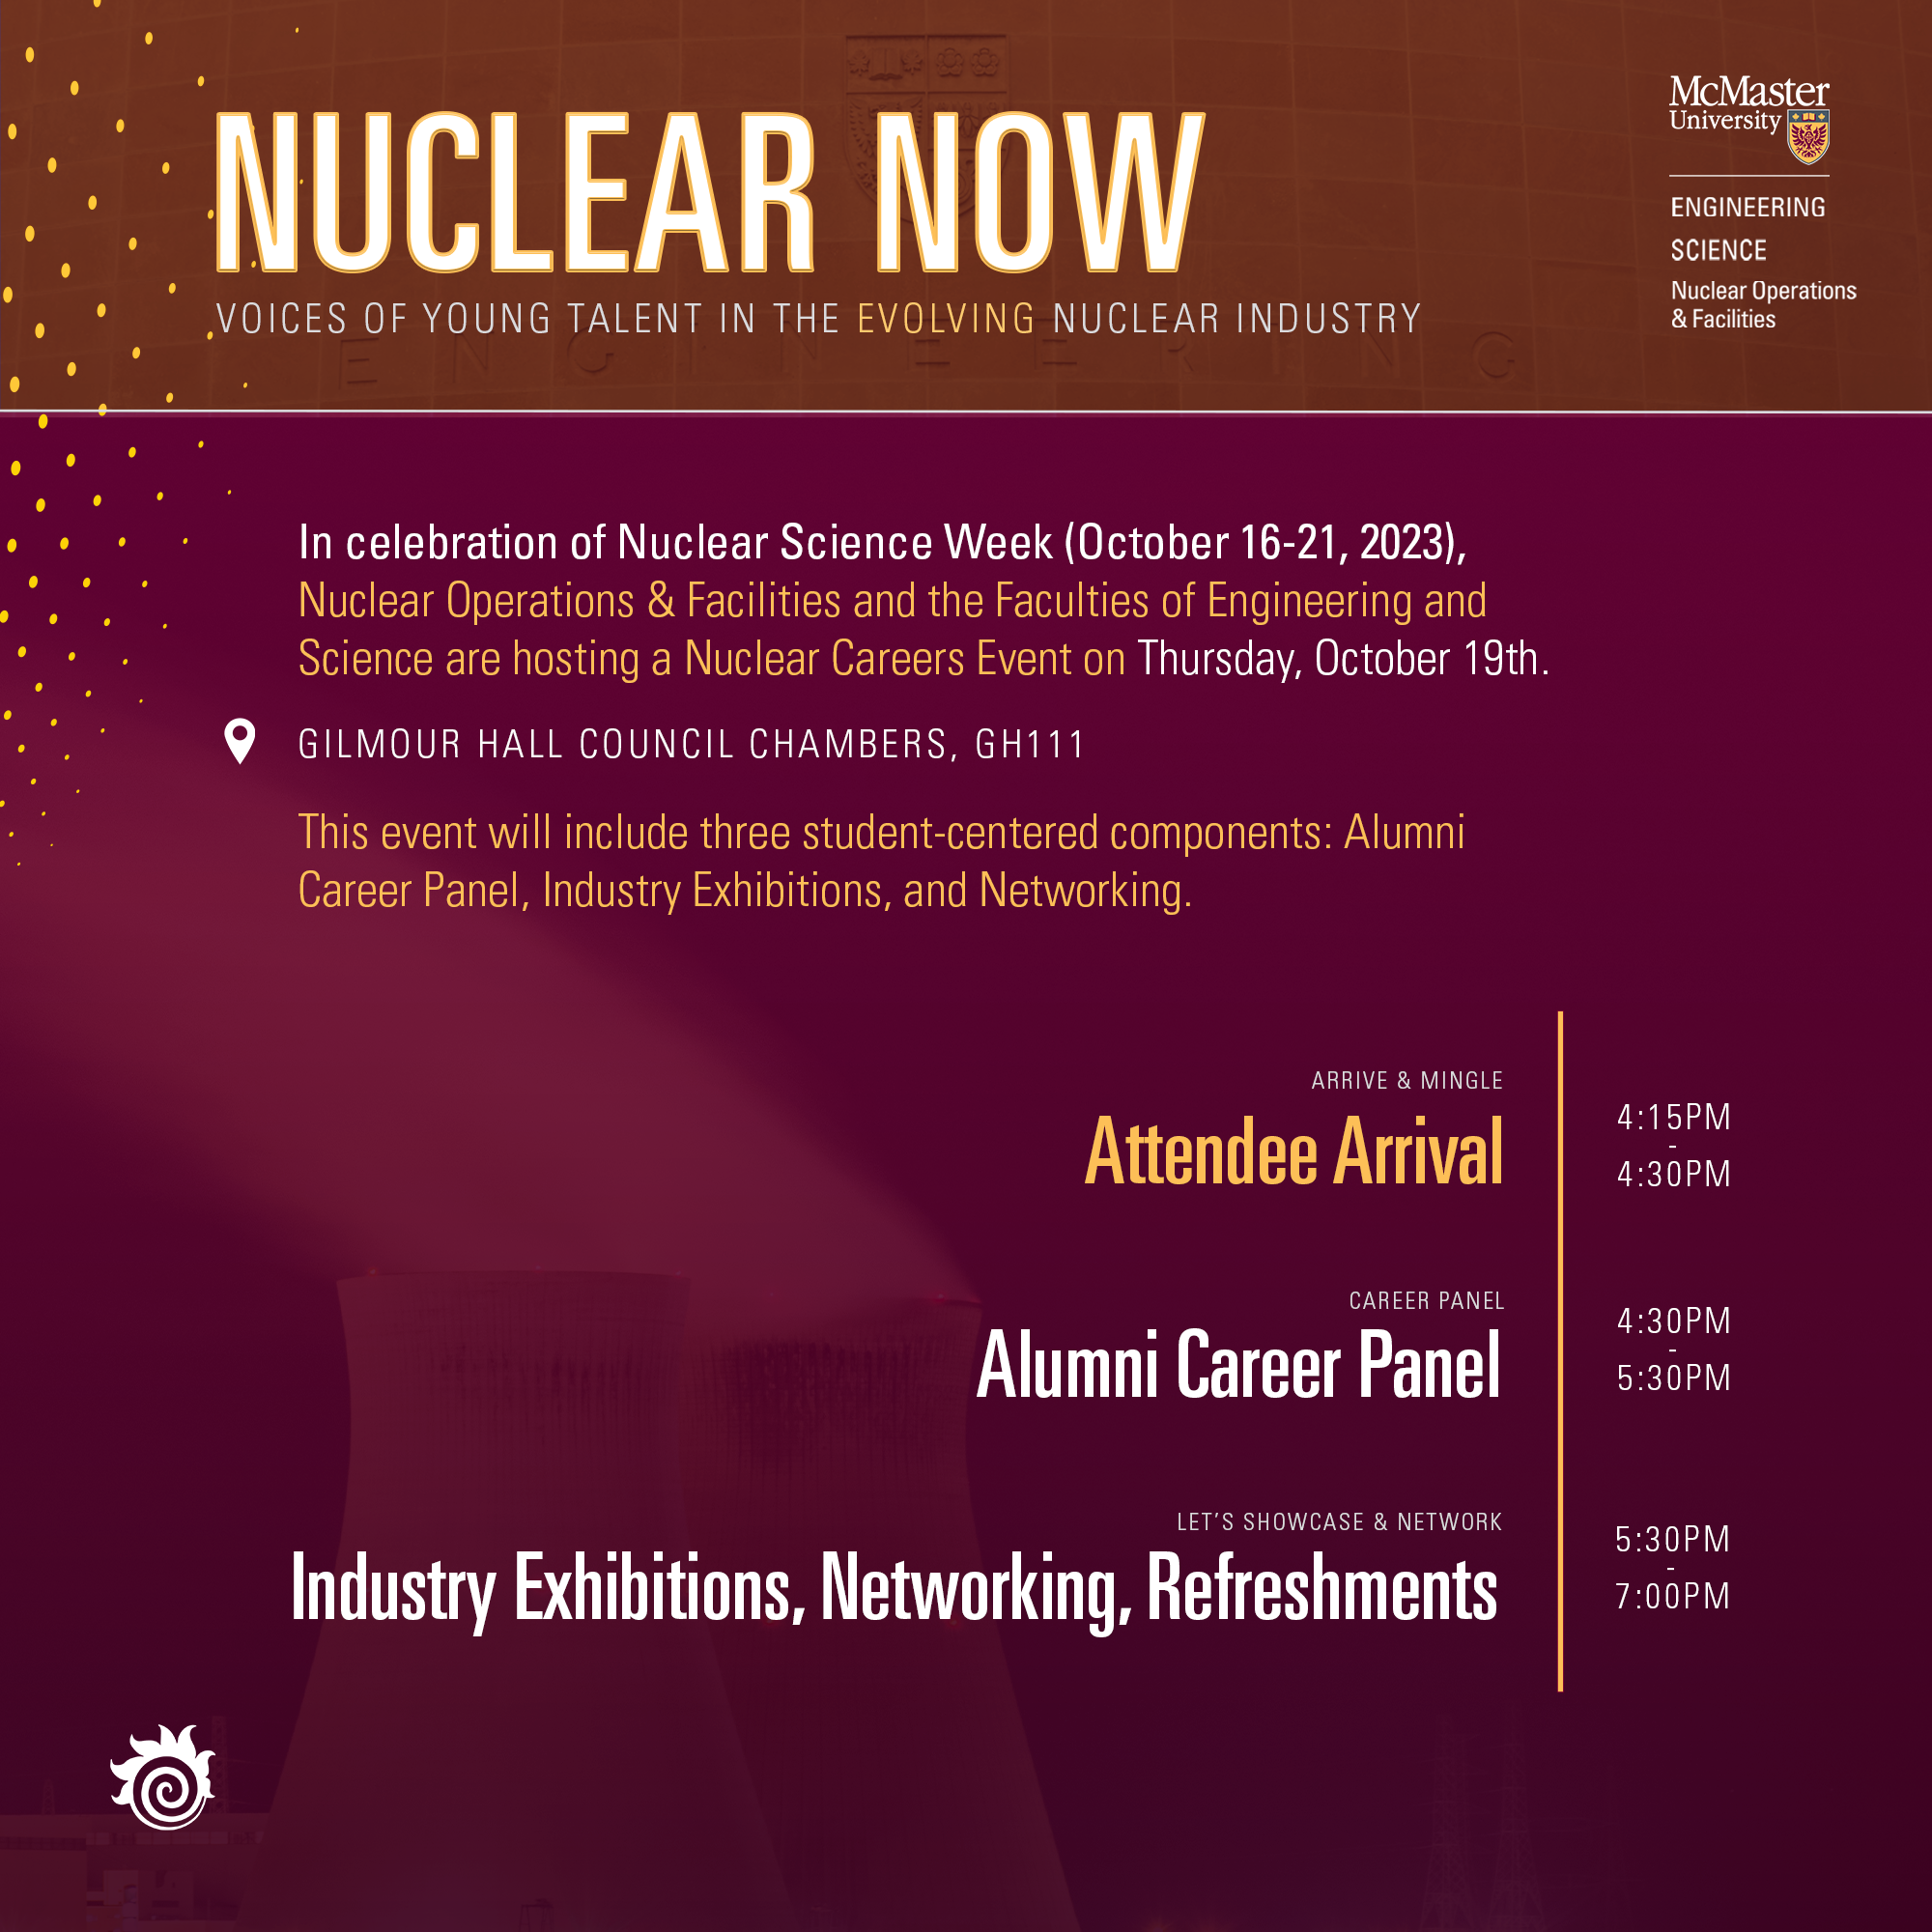 Attendee arrival 4:15-4:30. Alumni Career panel 4:30-5:30. Industry exhibitions and networking 5:30-7:00.